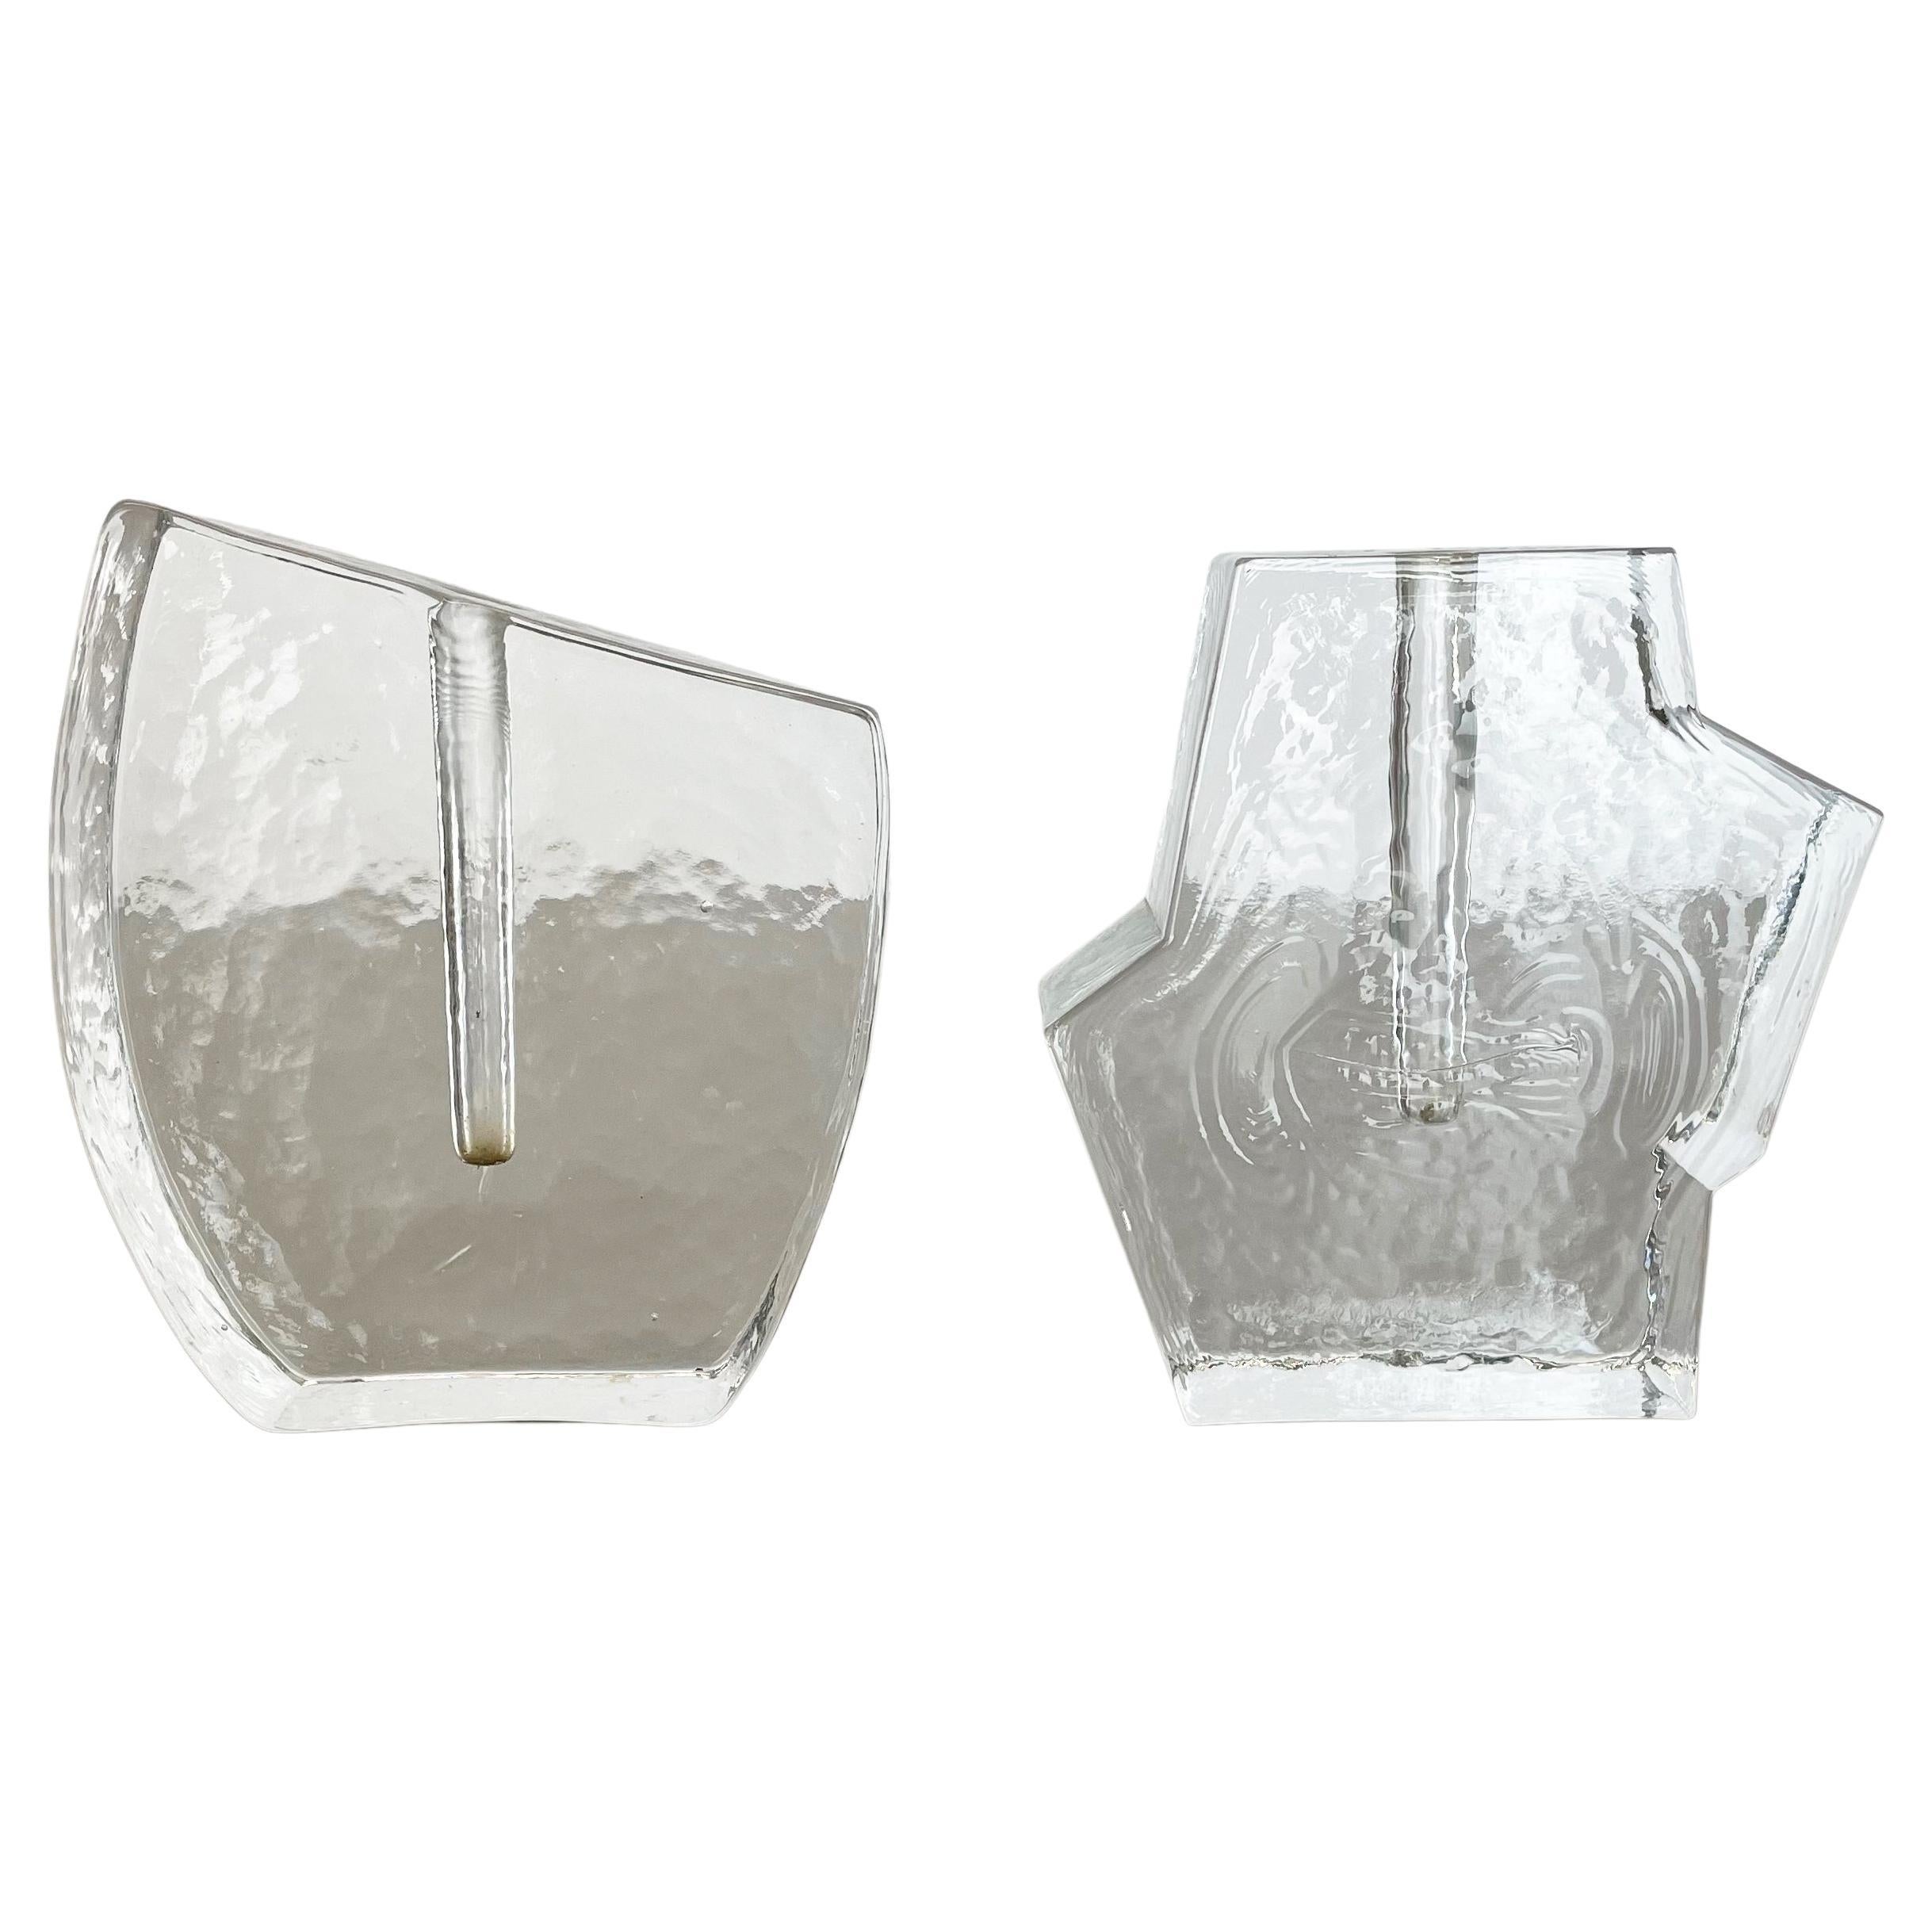 Set of 2 "Brutalist" Rock Glass Vases by Peill and Putzler Attrib., Germany 1970